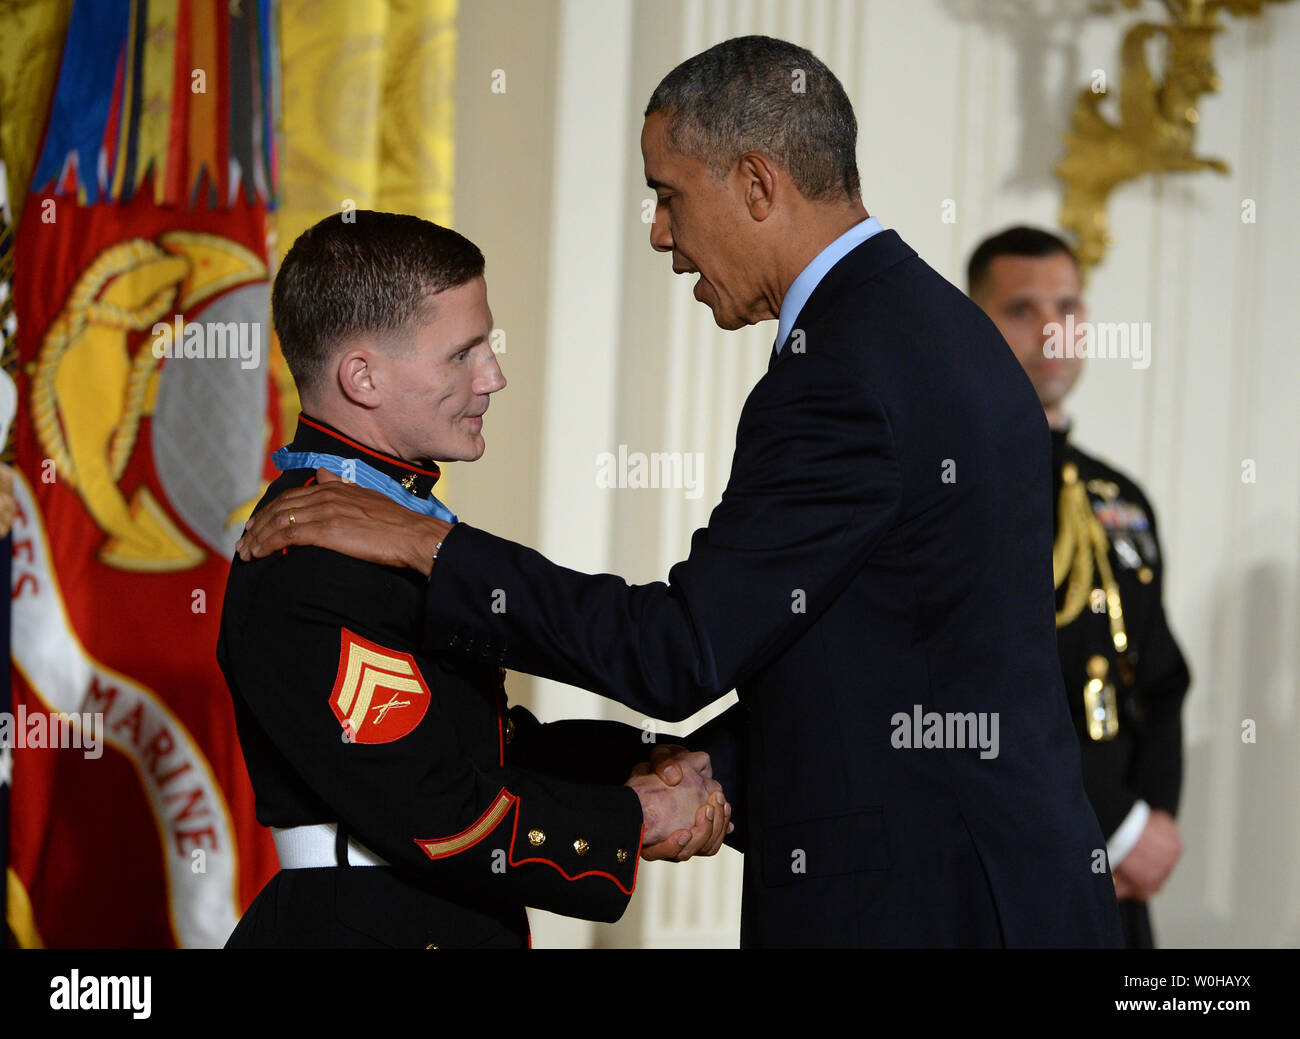 President Barack Obama awards the Medal of Honor to retired Marine William 'Kyle' Carpenter during a ceremony in the East Room of the White House in Washington, DC on June 19, 2014.  Carpenter, 24, of Gilbert, South Carolina was awarded the nation's highest award for gallantry for covering a grenade with his body to save a Marine's life in Afghanistan in 2010.    UPI/Pat Benic Stock Photo